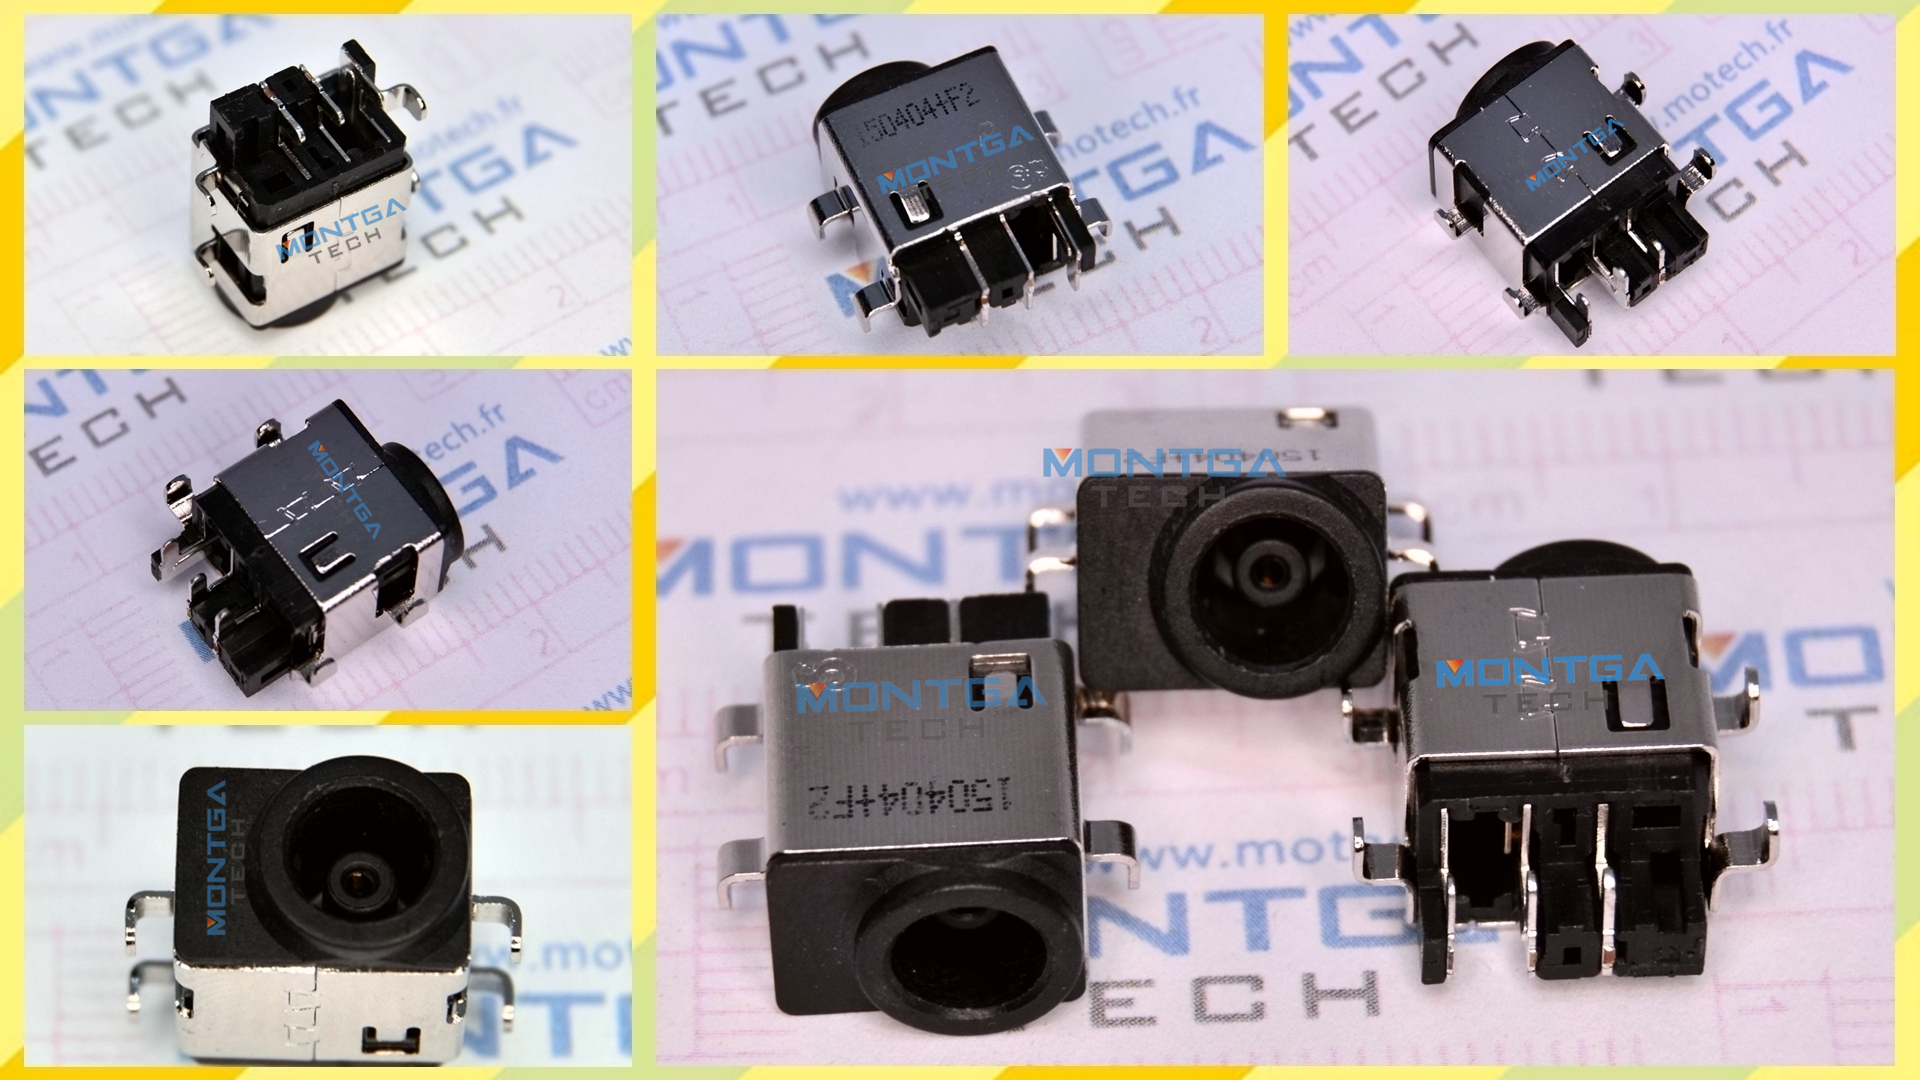 charging connector SAMSUNG RV709, DC Power Jack SAMSUNG RV709, plug SAMSUNG RV709, Jack socket SAMSUNG RV709, 